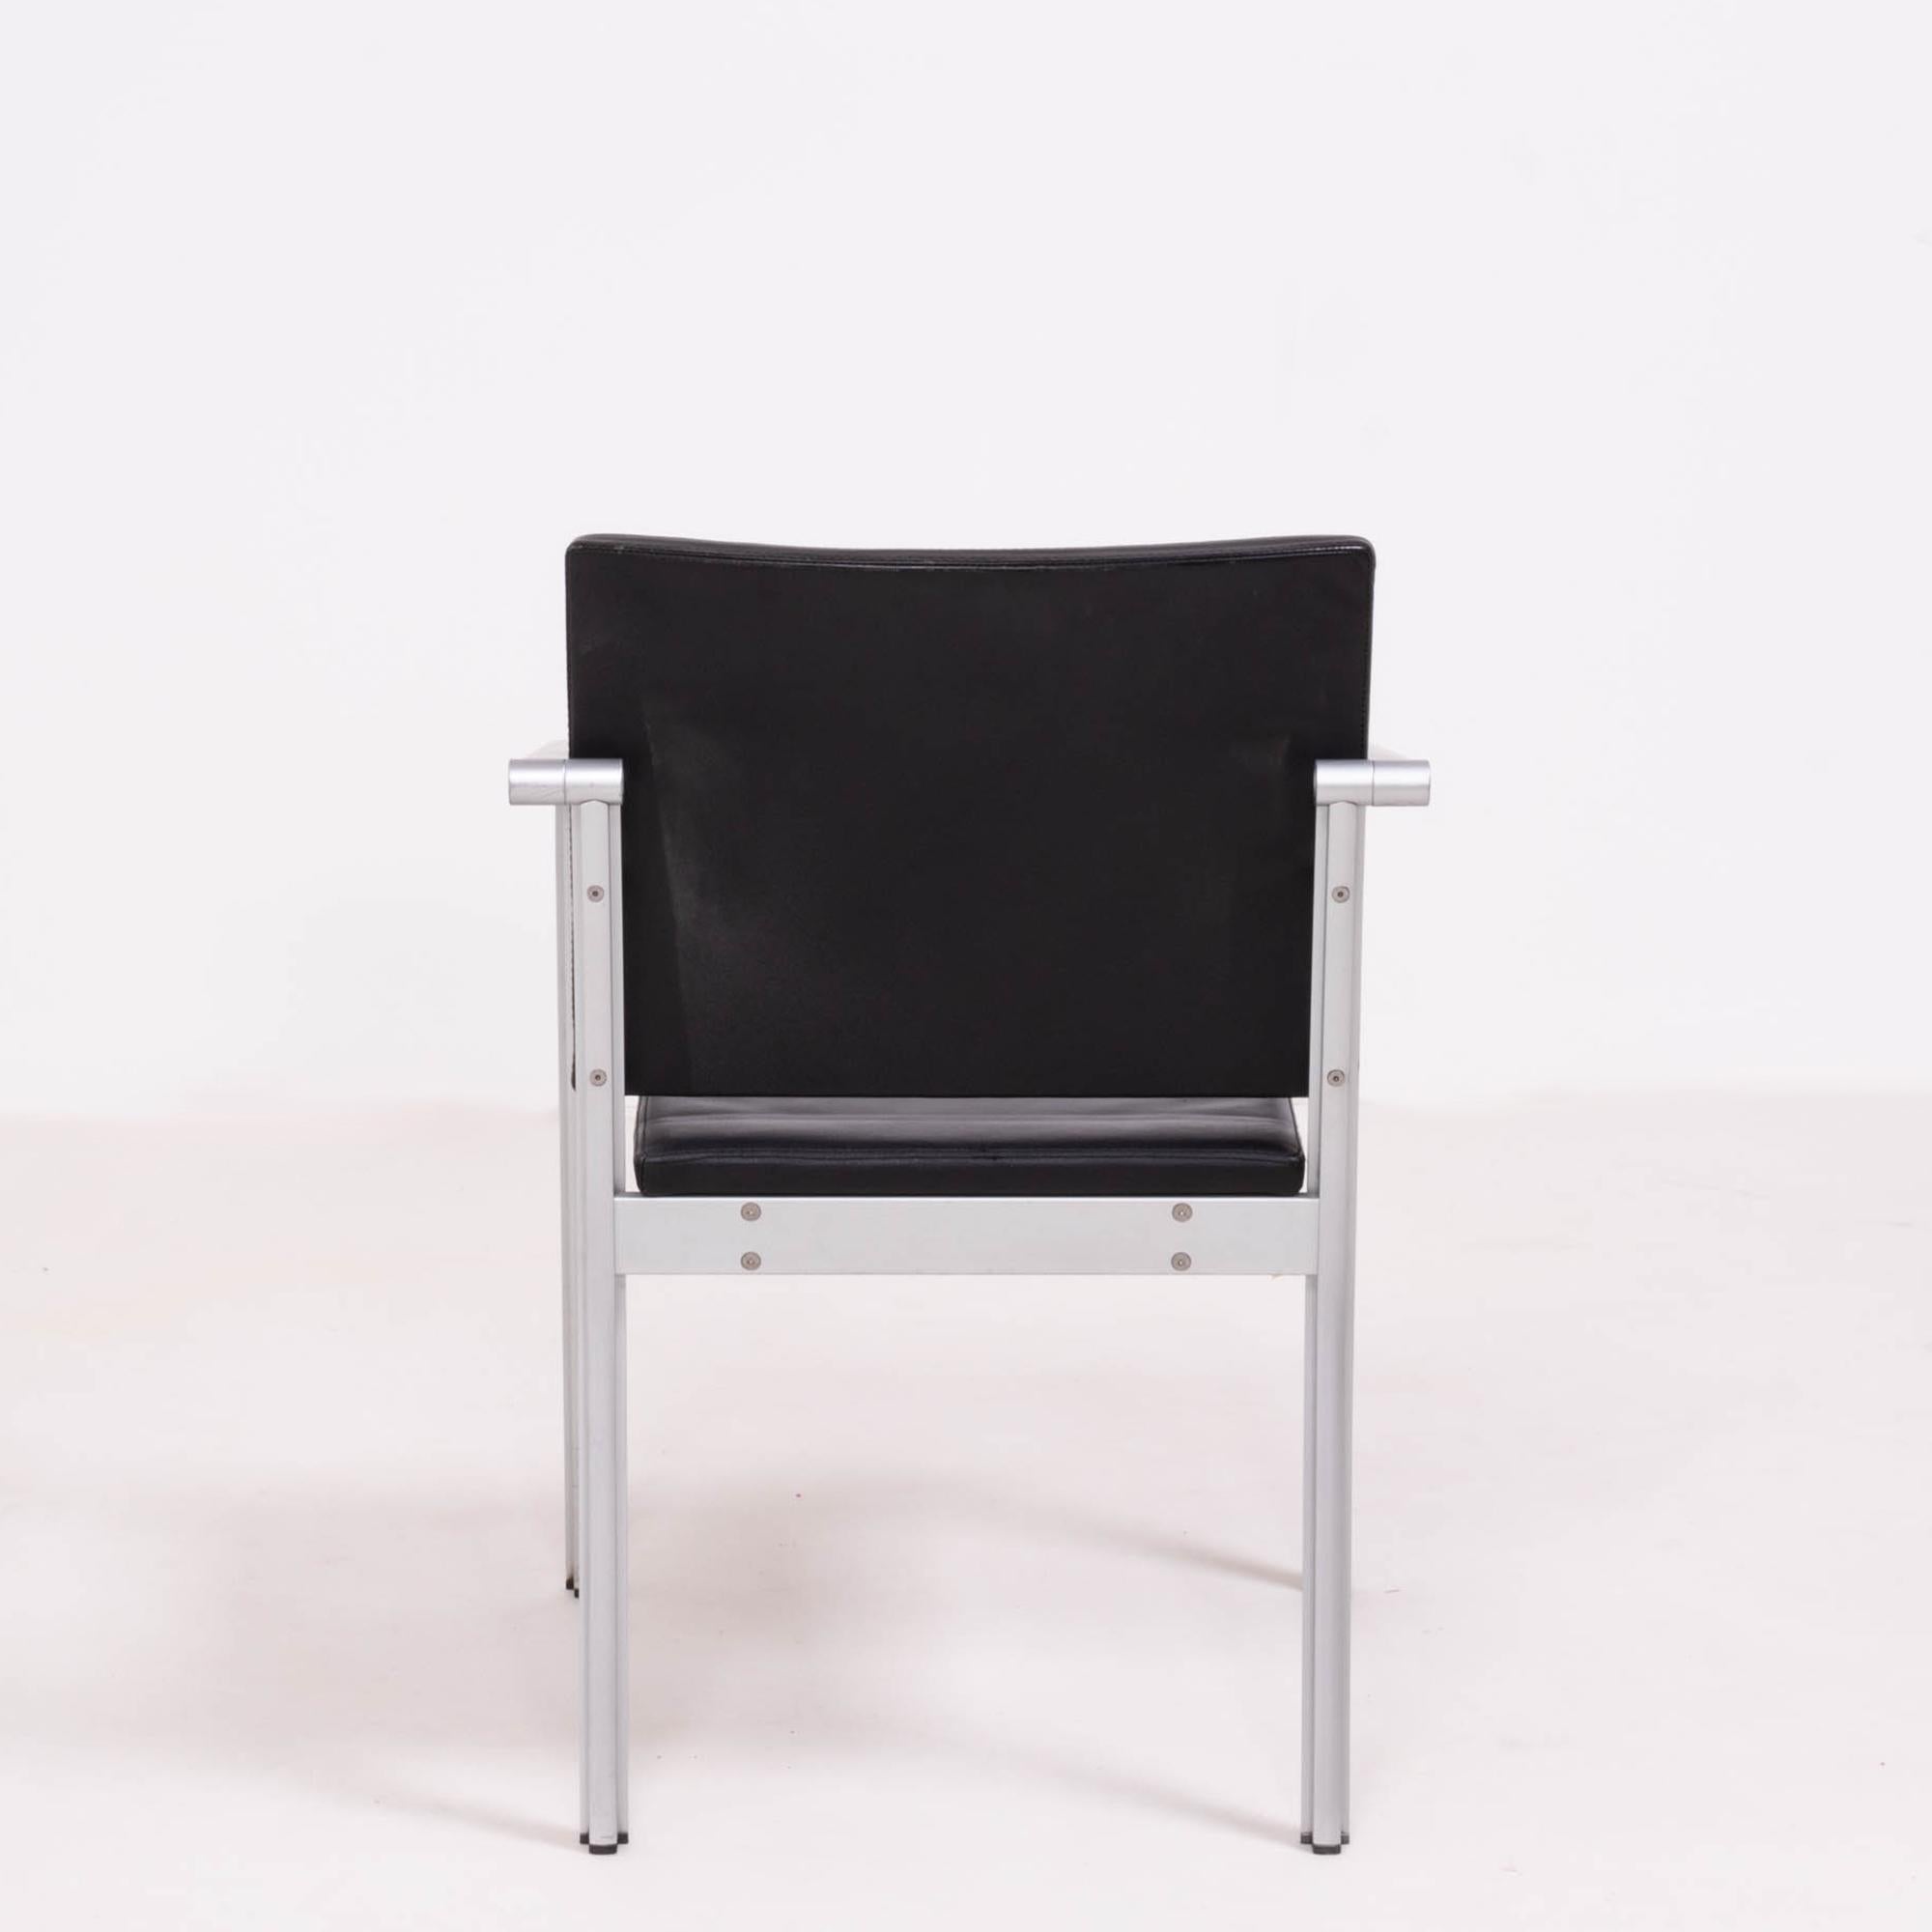 Thonet by Norman Foster A901 PF Aluminium and Black Leather Dining Chairs, Pair 2